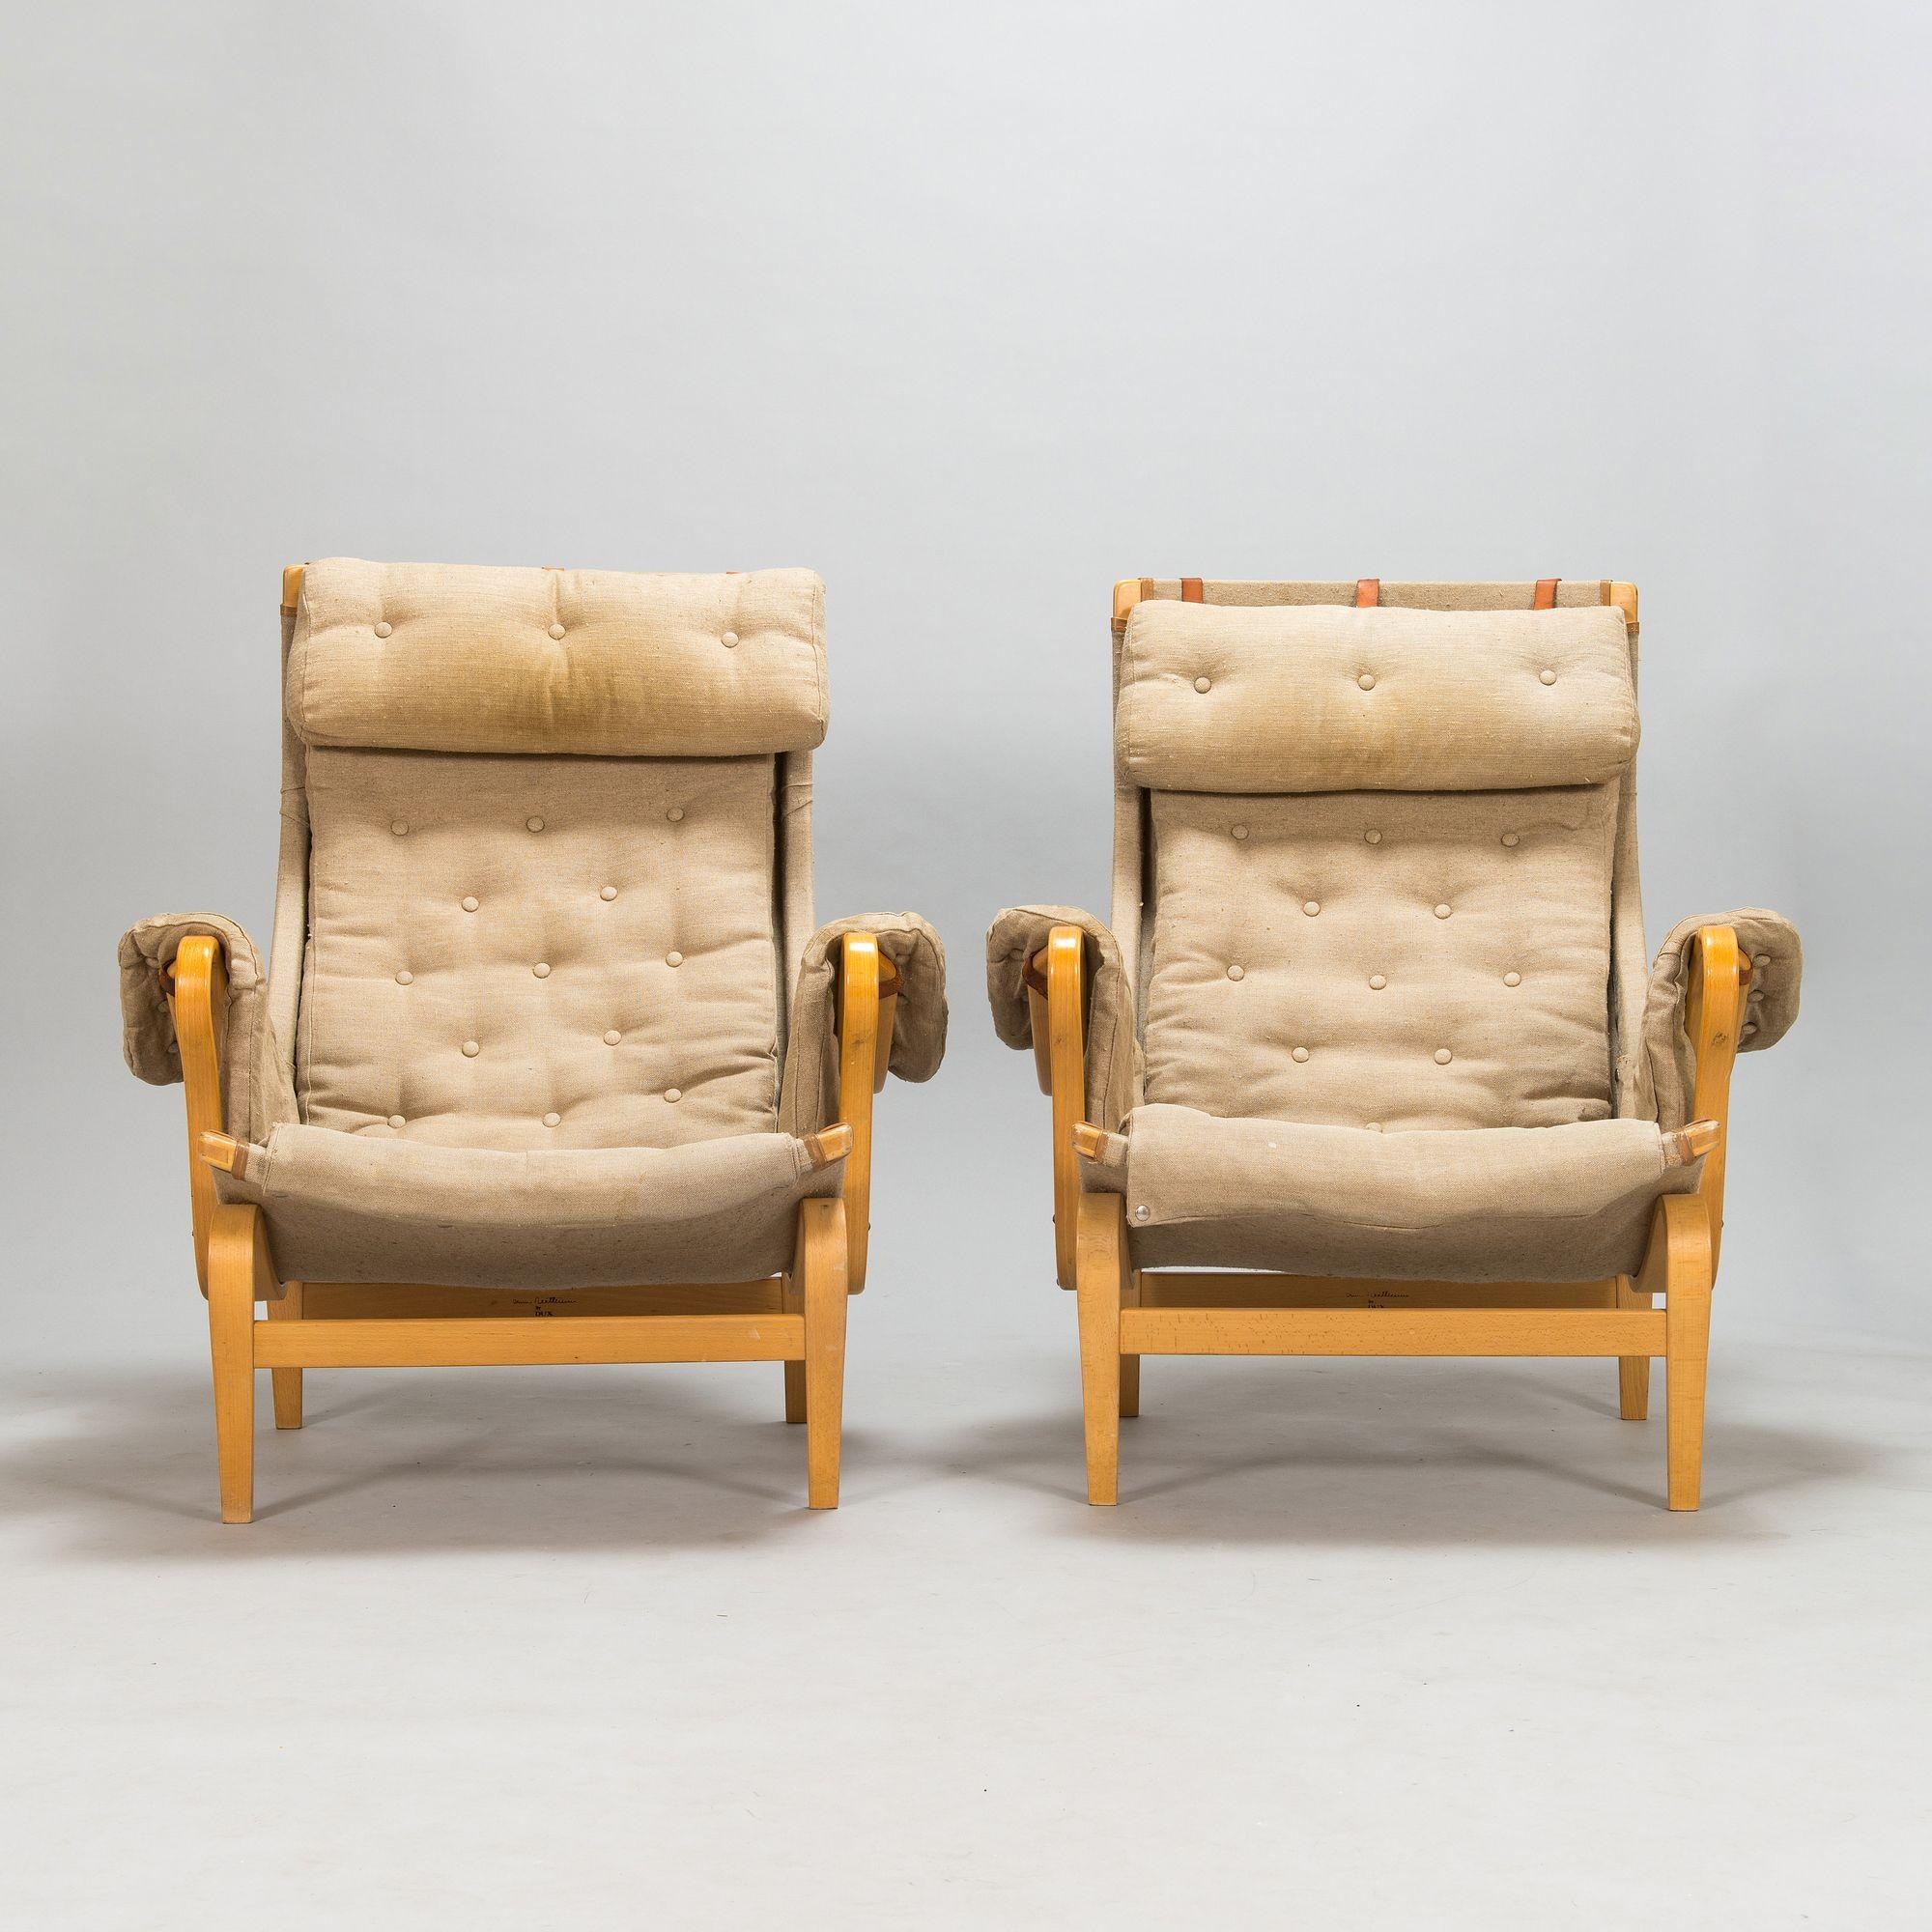 Pair Mid-Century Modern pernilla arm / lounge chairs by Bruno Mathsson, Denmark
 
Pair of Mid-Century Modern Lounge Chairs by Bruno Mathsson. Pair of 'Pernilla' easy chairs by Dux, late 20th Century. This pair of chairs maintains it's original